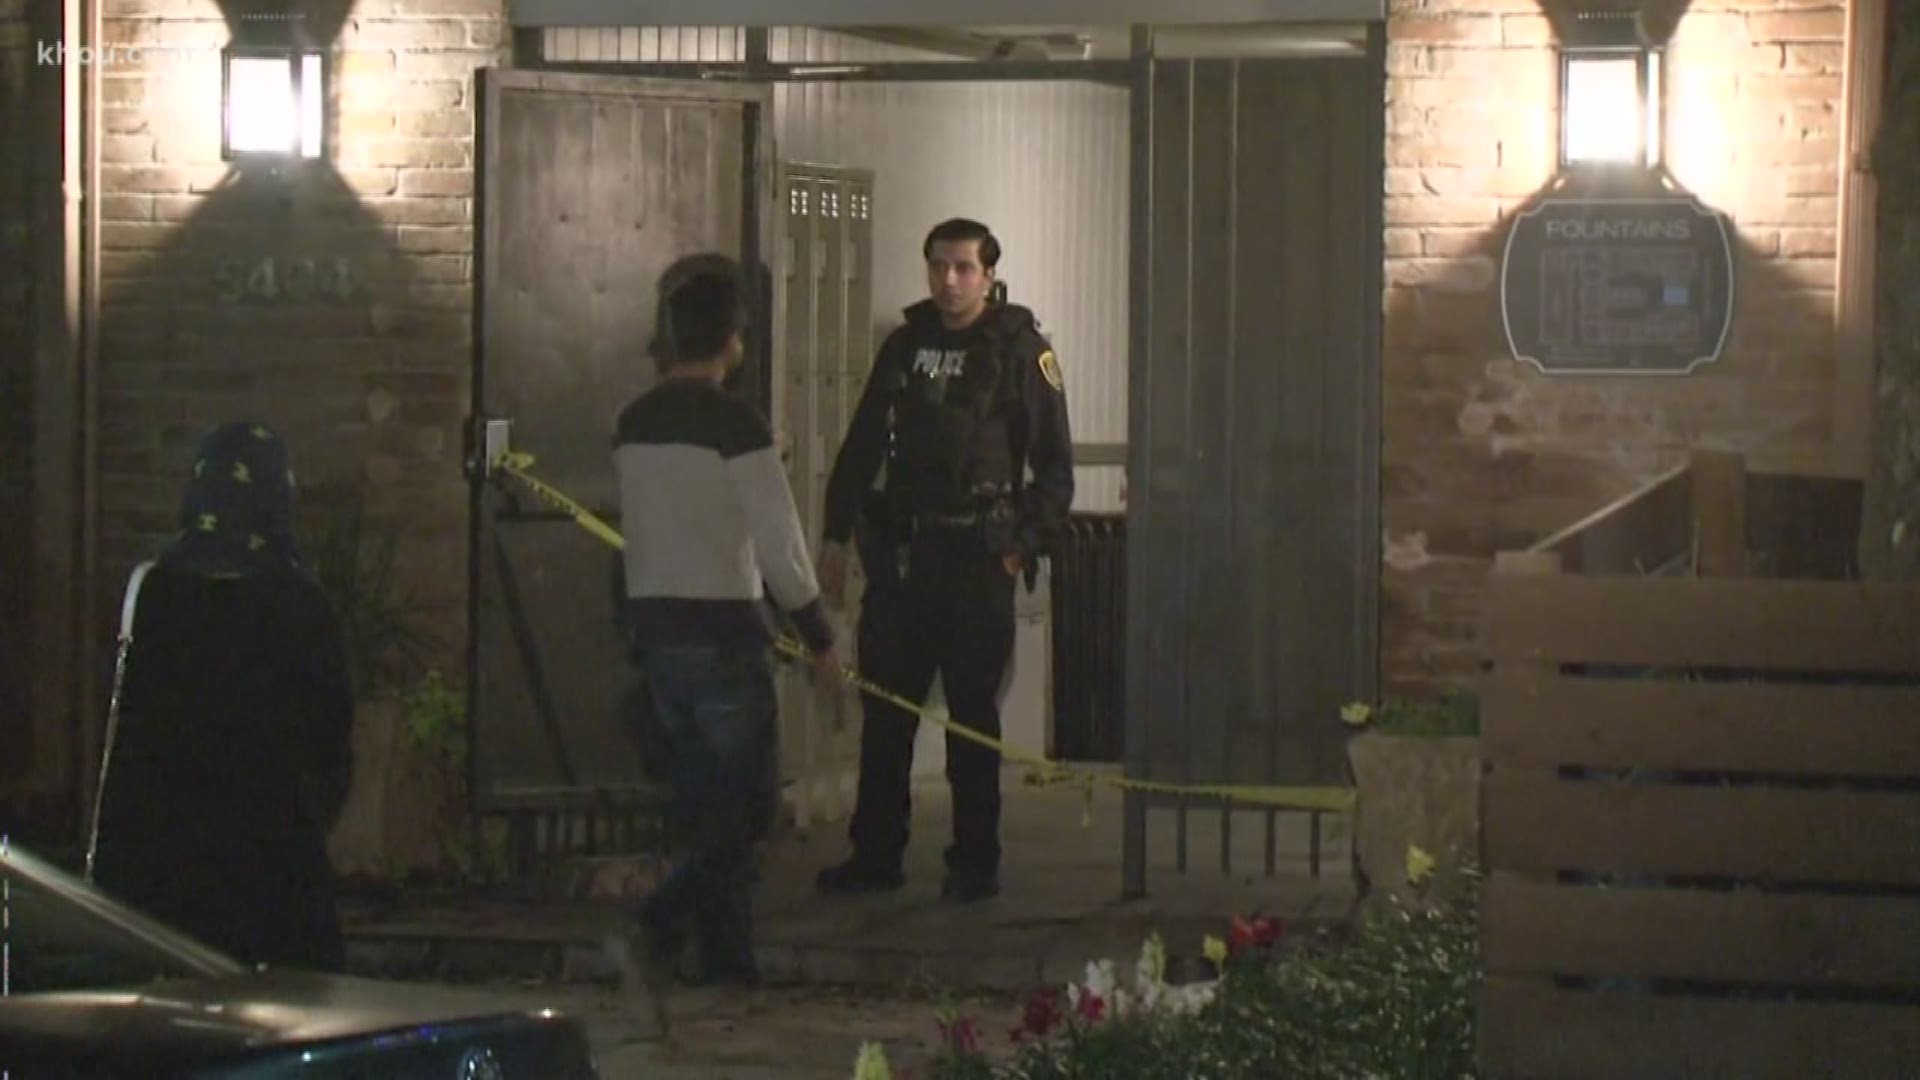 Houston police say, according to the homeowner, several men kicked in the door to his condo and tried to rob him. The victim grabbed his gun and a shootout ensued.